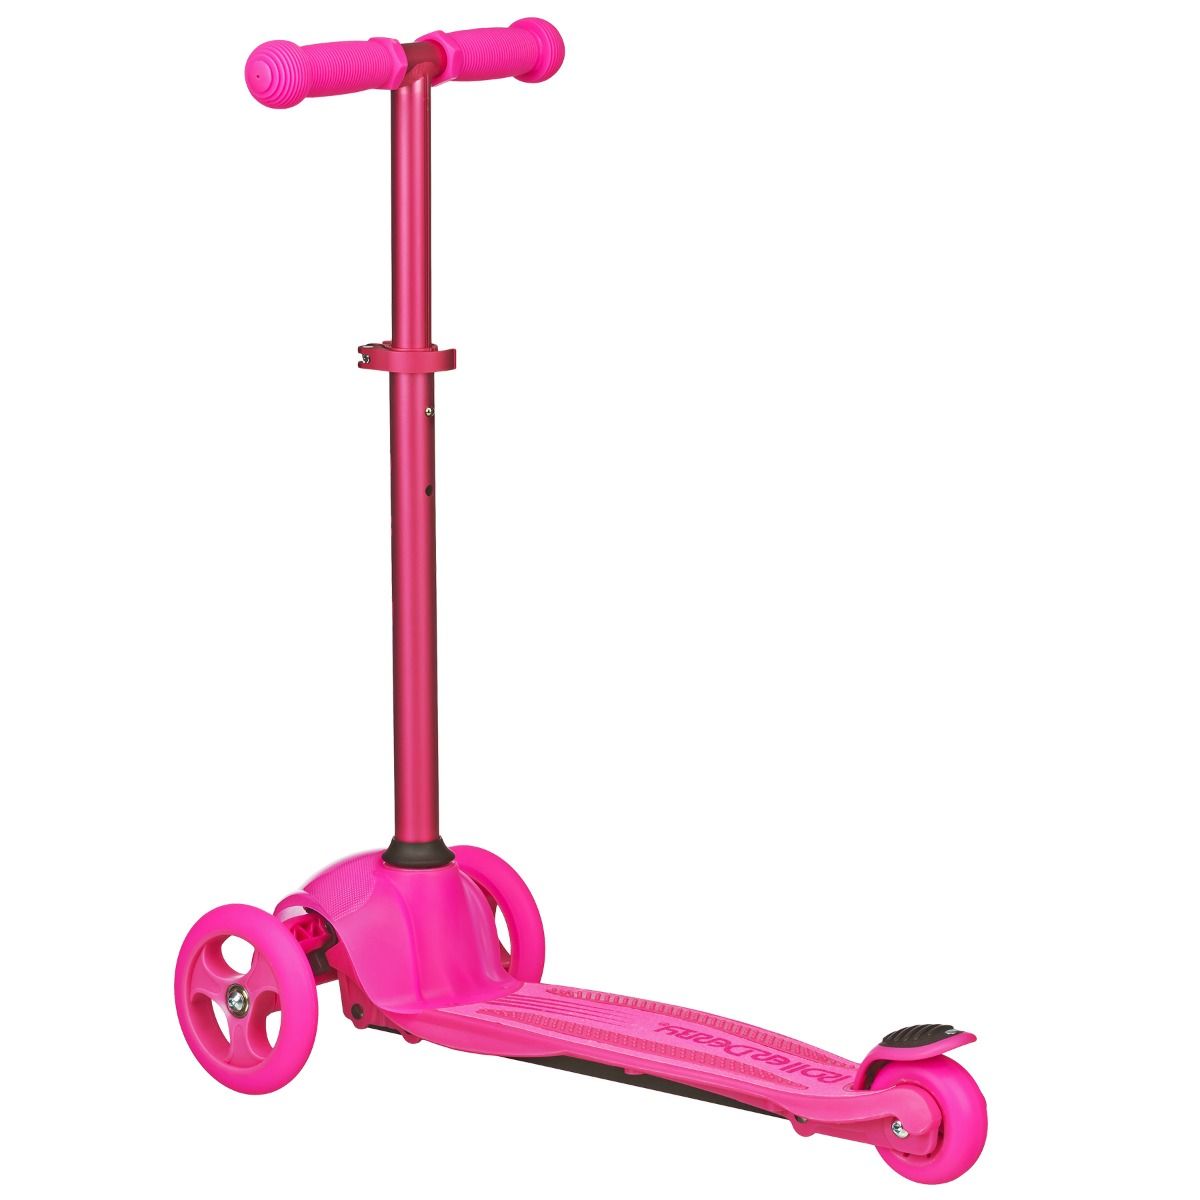 ROLLER DERBY 3 WHEEL SCOOTER PINK - WRDS101PK